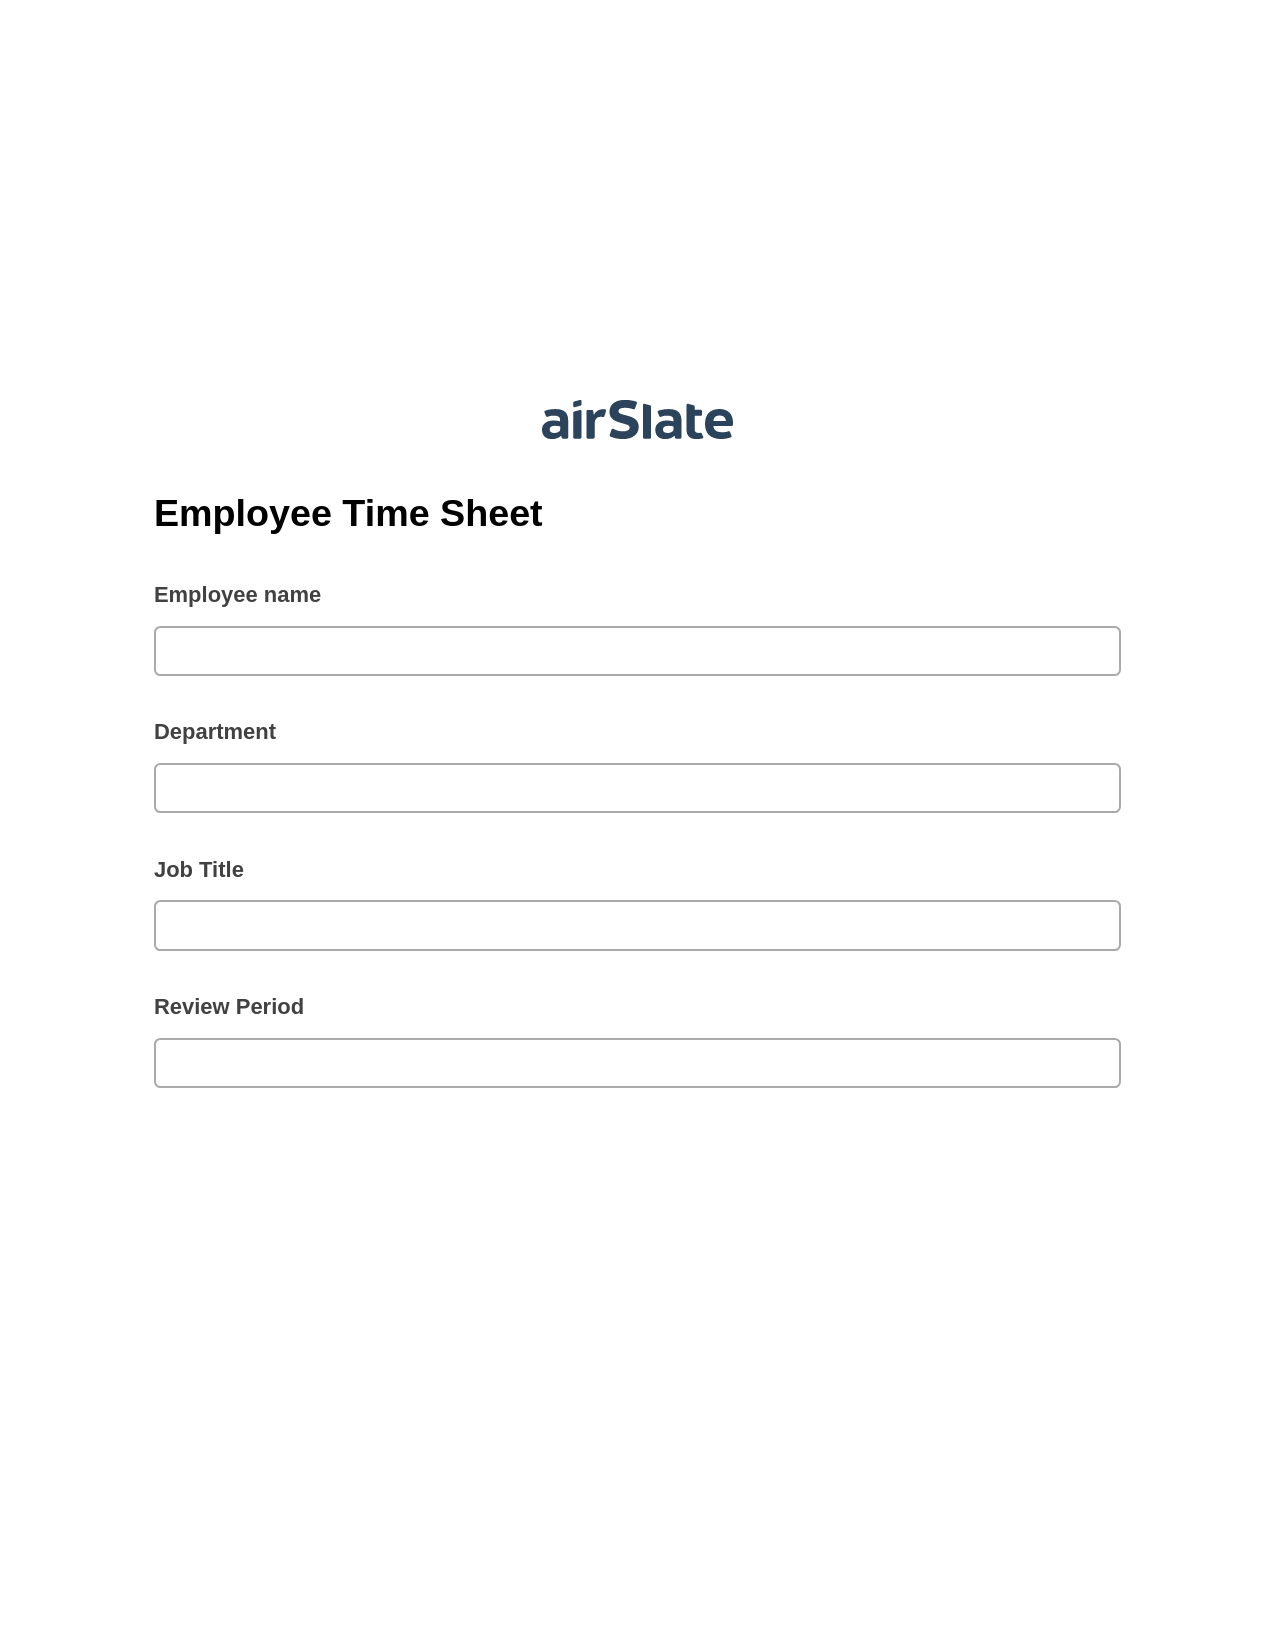 Multirole Employee Time Sheet Pre-fill from MS Dynamics 365 Records, Send a Slate with Roles Bot, Export to NetSuite Bot